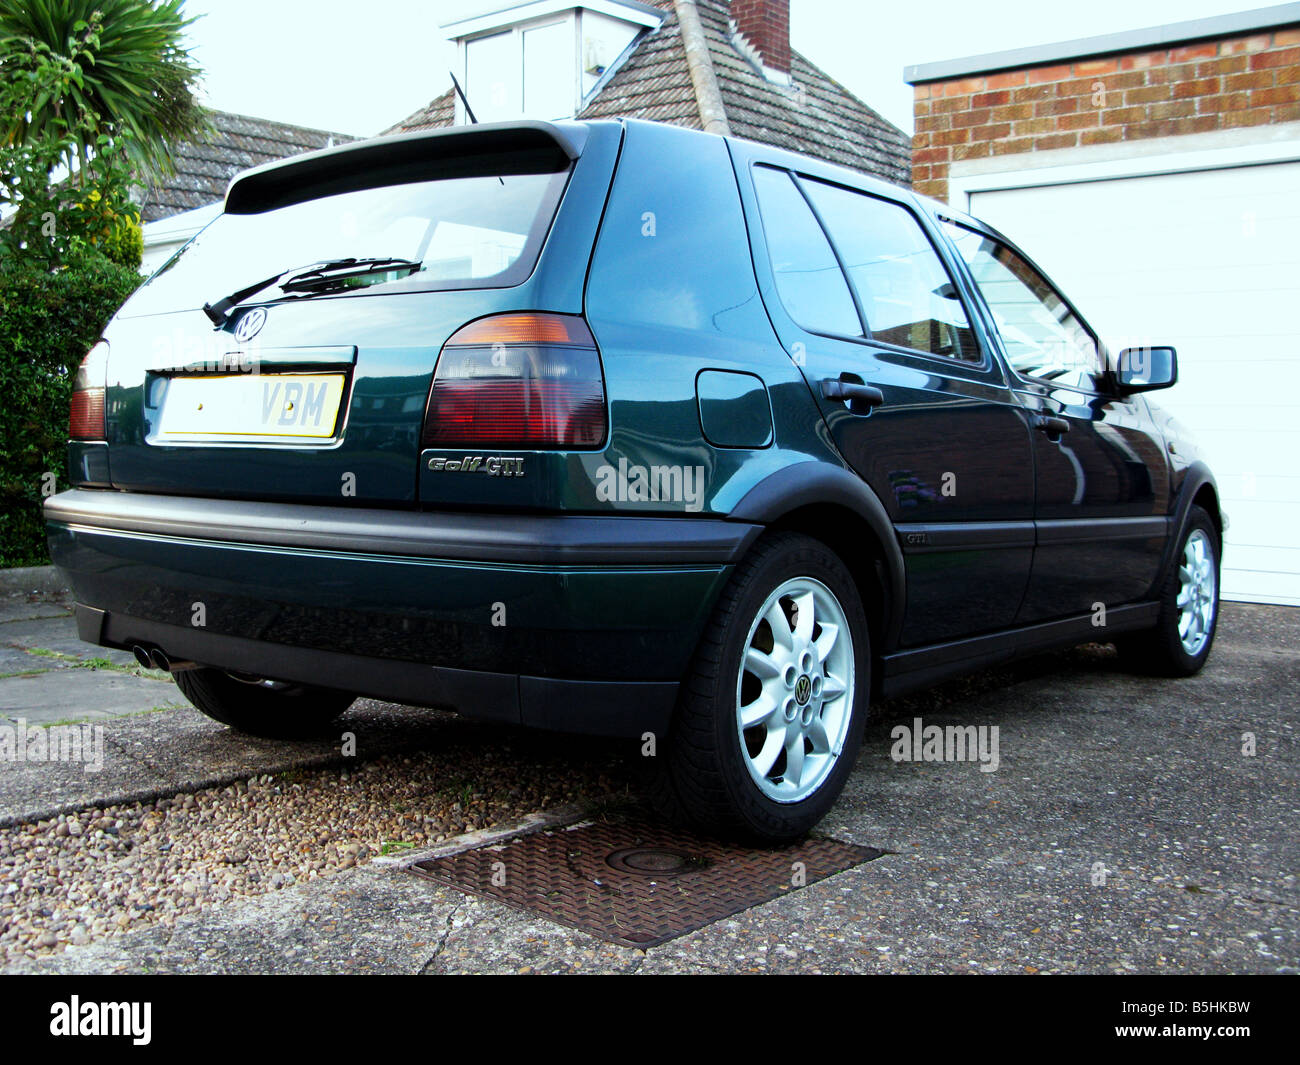 The Mk3 GTi, built to last, pocket rocket, solid motoring, enthusiasts, boy  racer, two-bar grille, black wheel arches, bumper extension, hot hatch  Stock Photo - Alamy